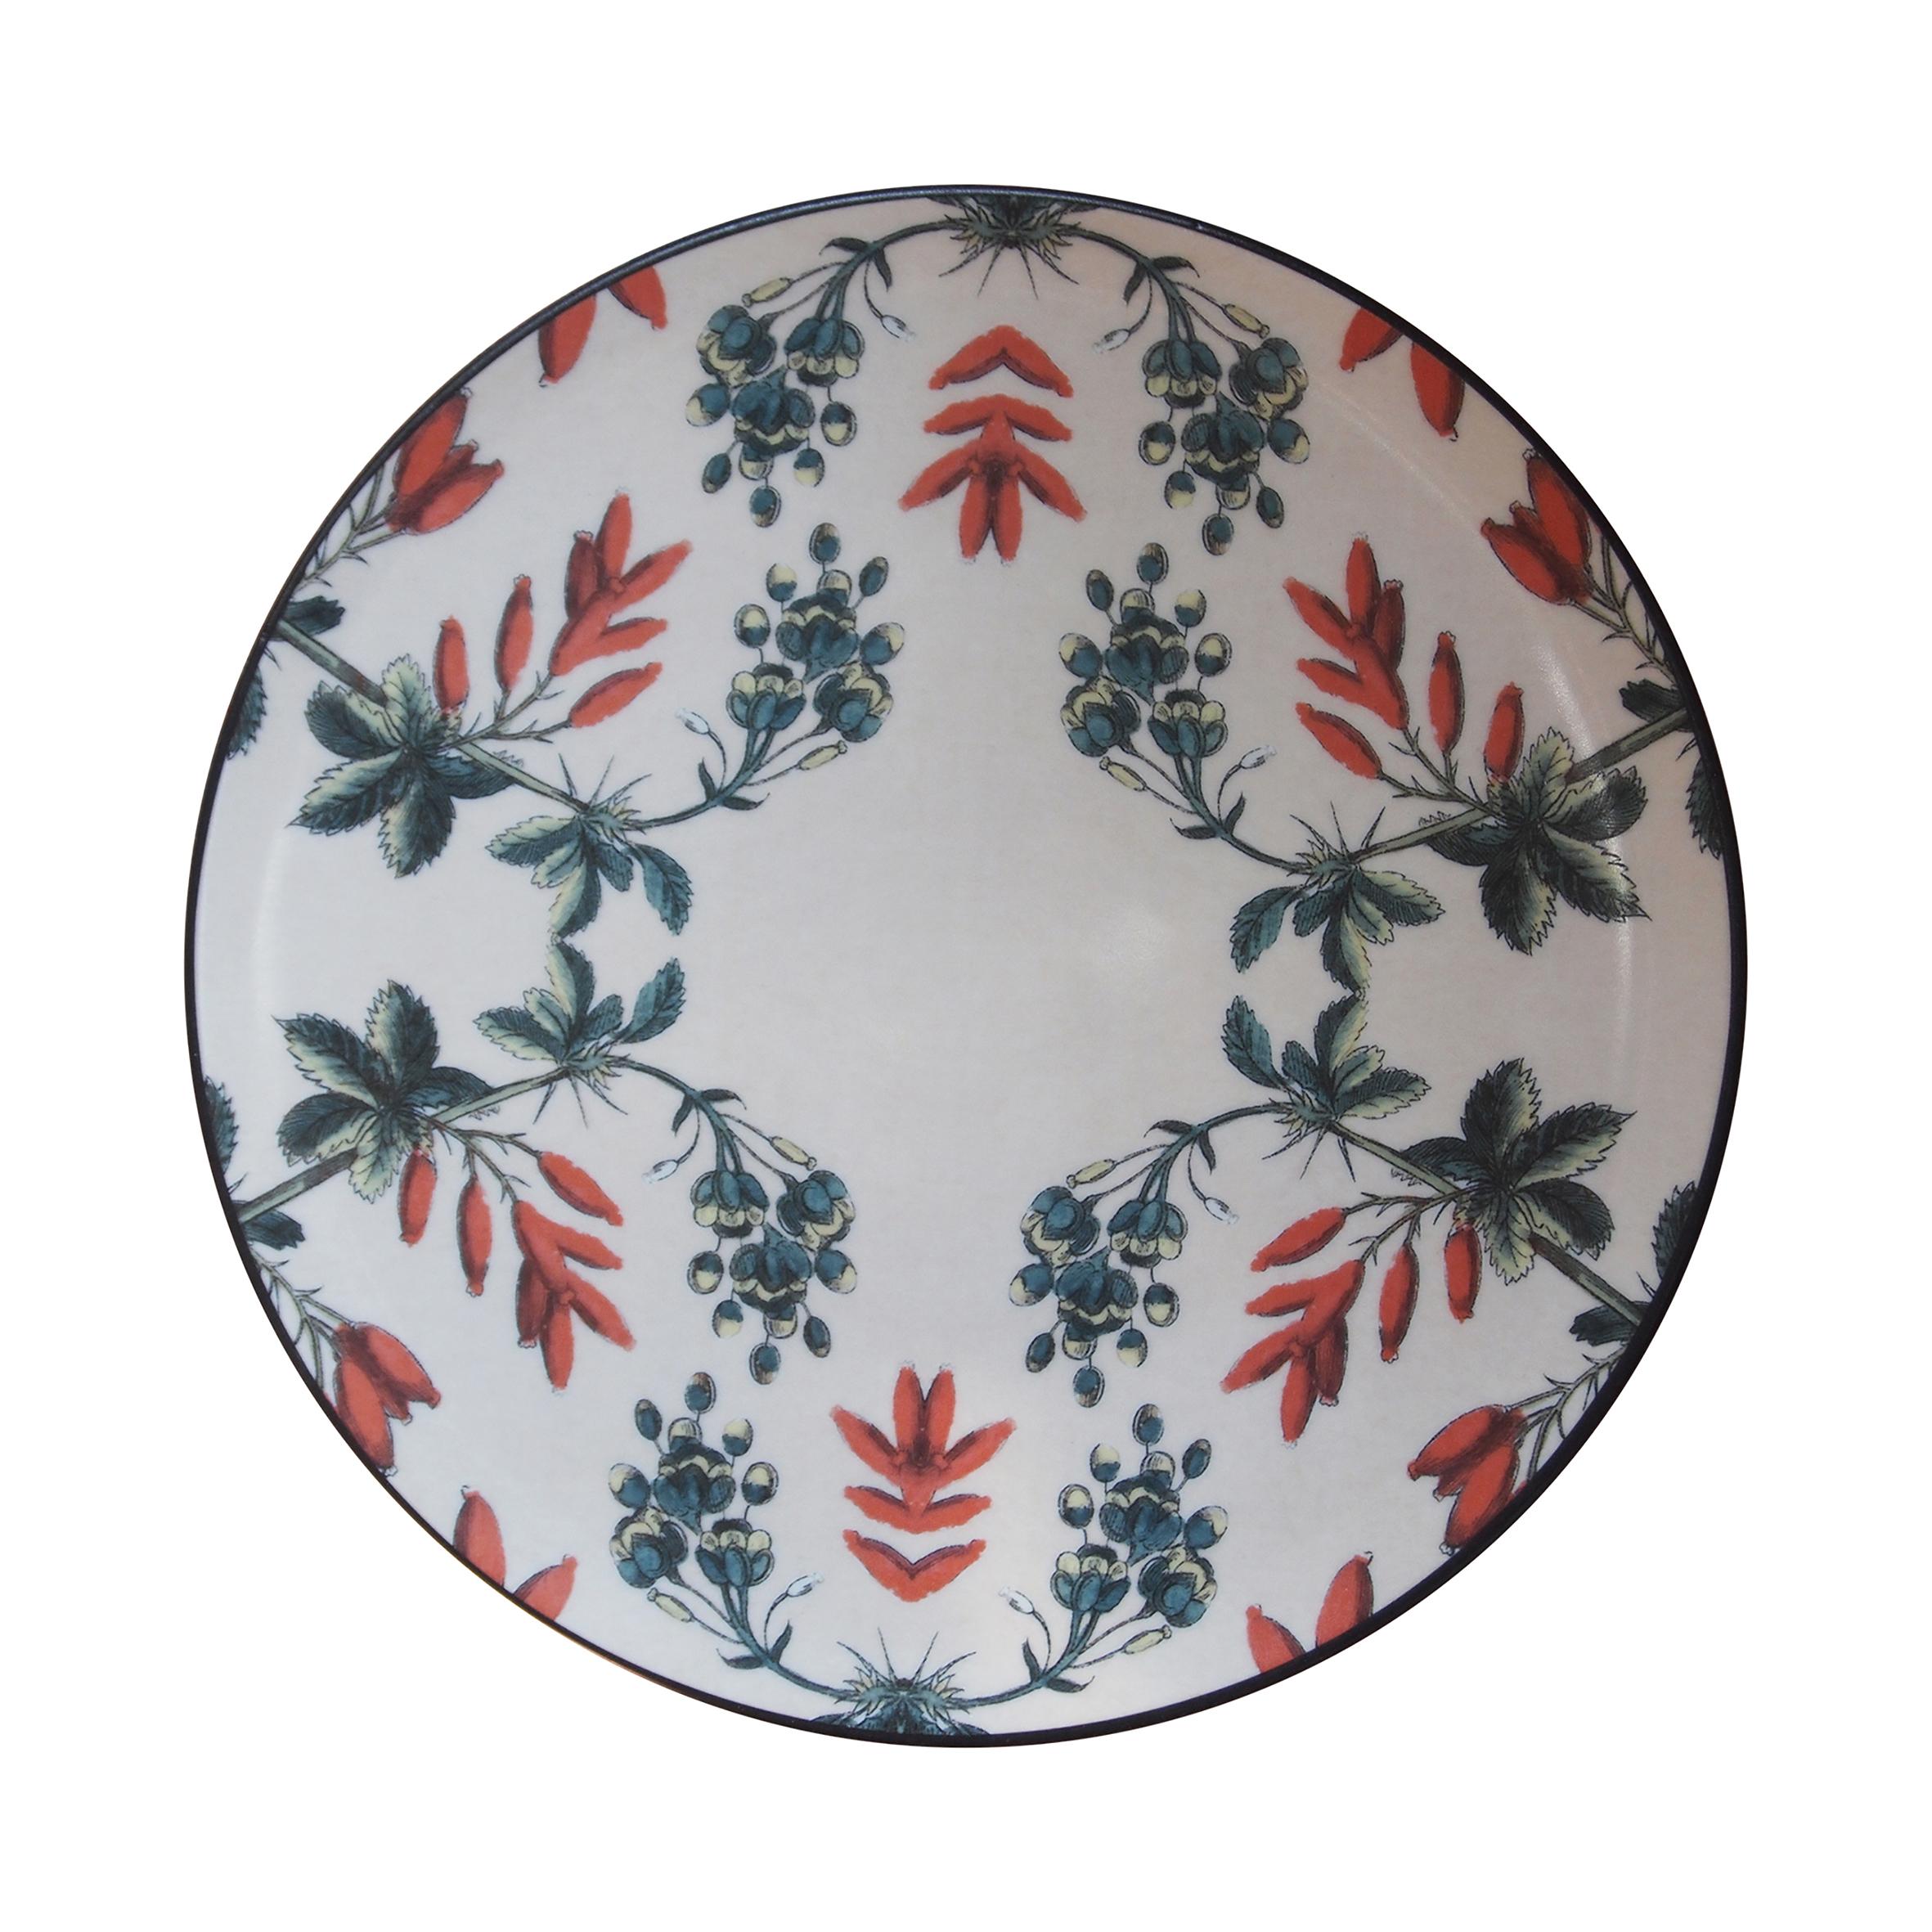 Sultan's Journey Flowers Porcelain Plate by Patch NYC for Les-Ottomans